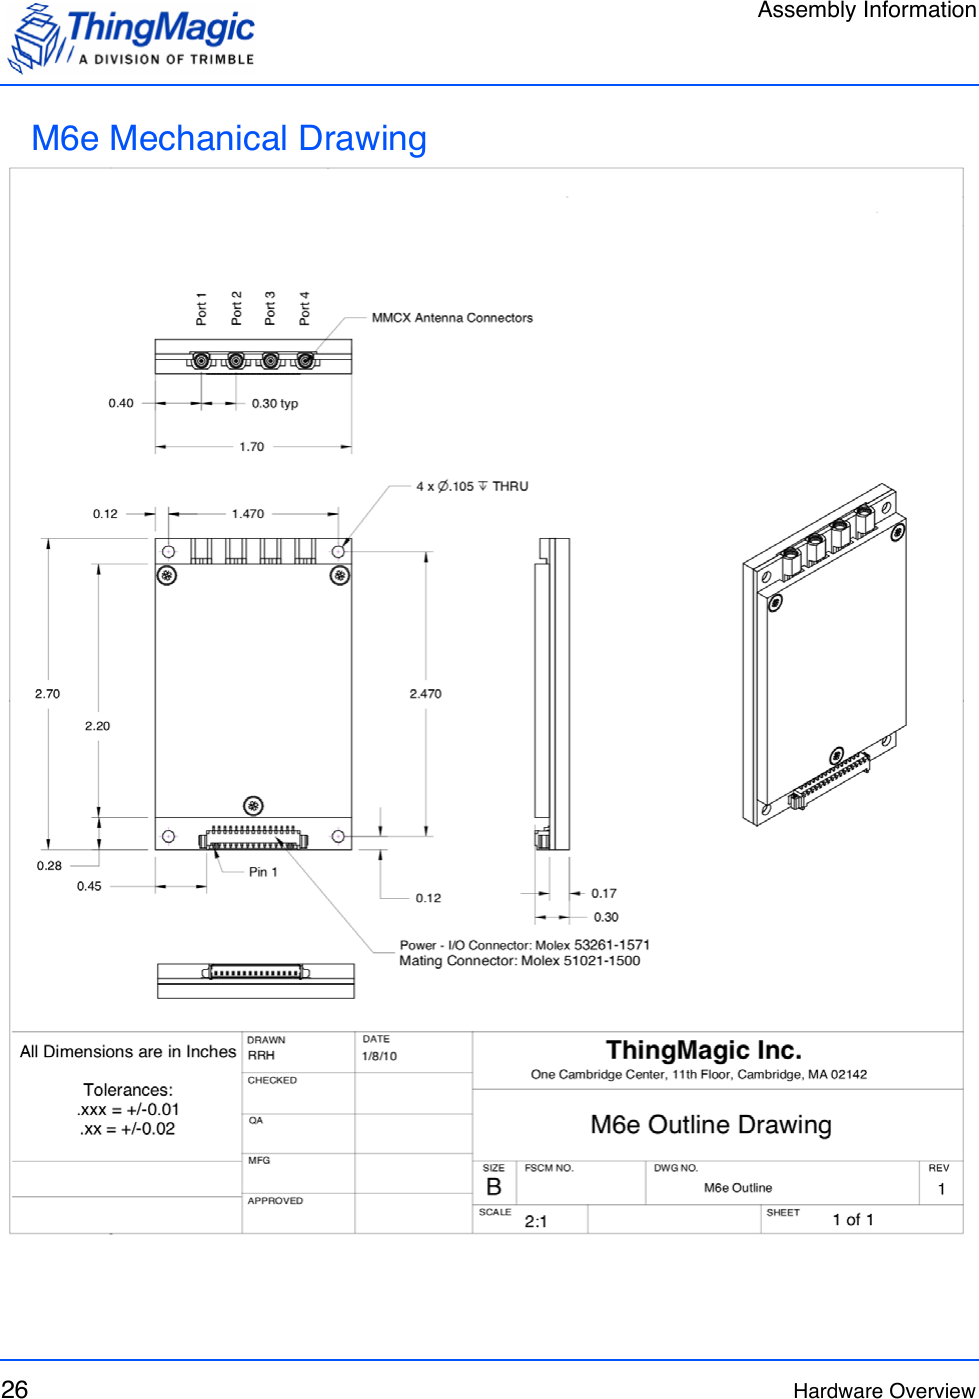 Assembly Information26 Hardware OverviewM6e Mechanical Drawing